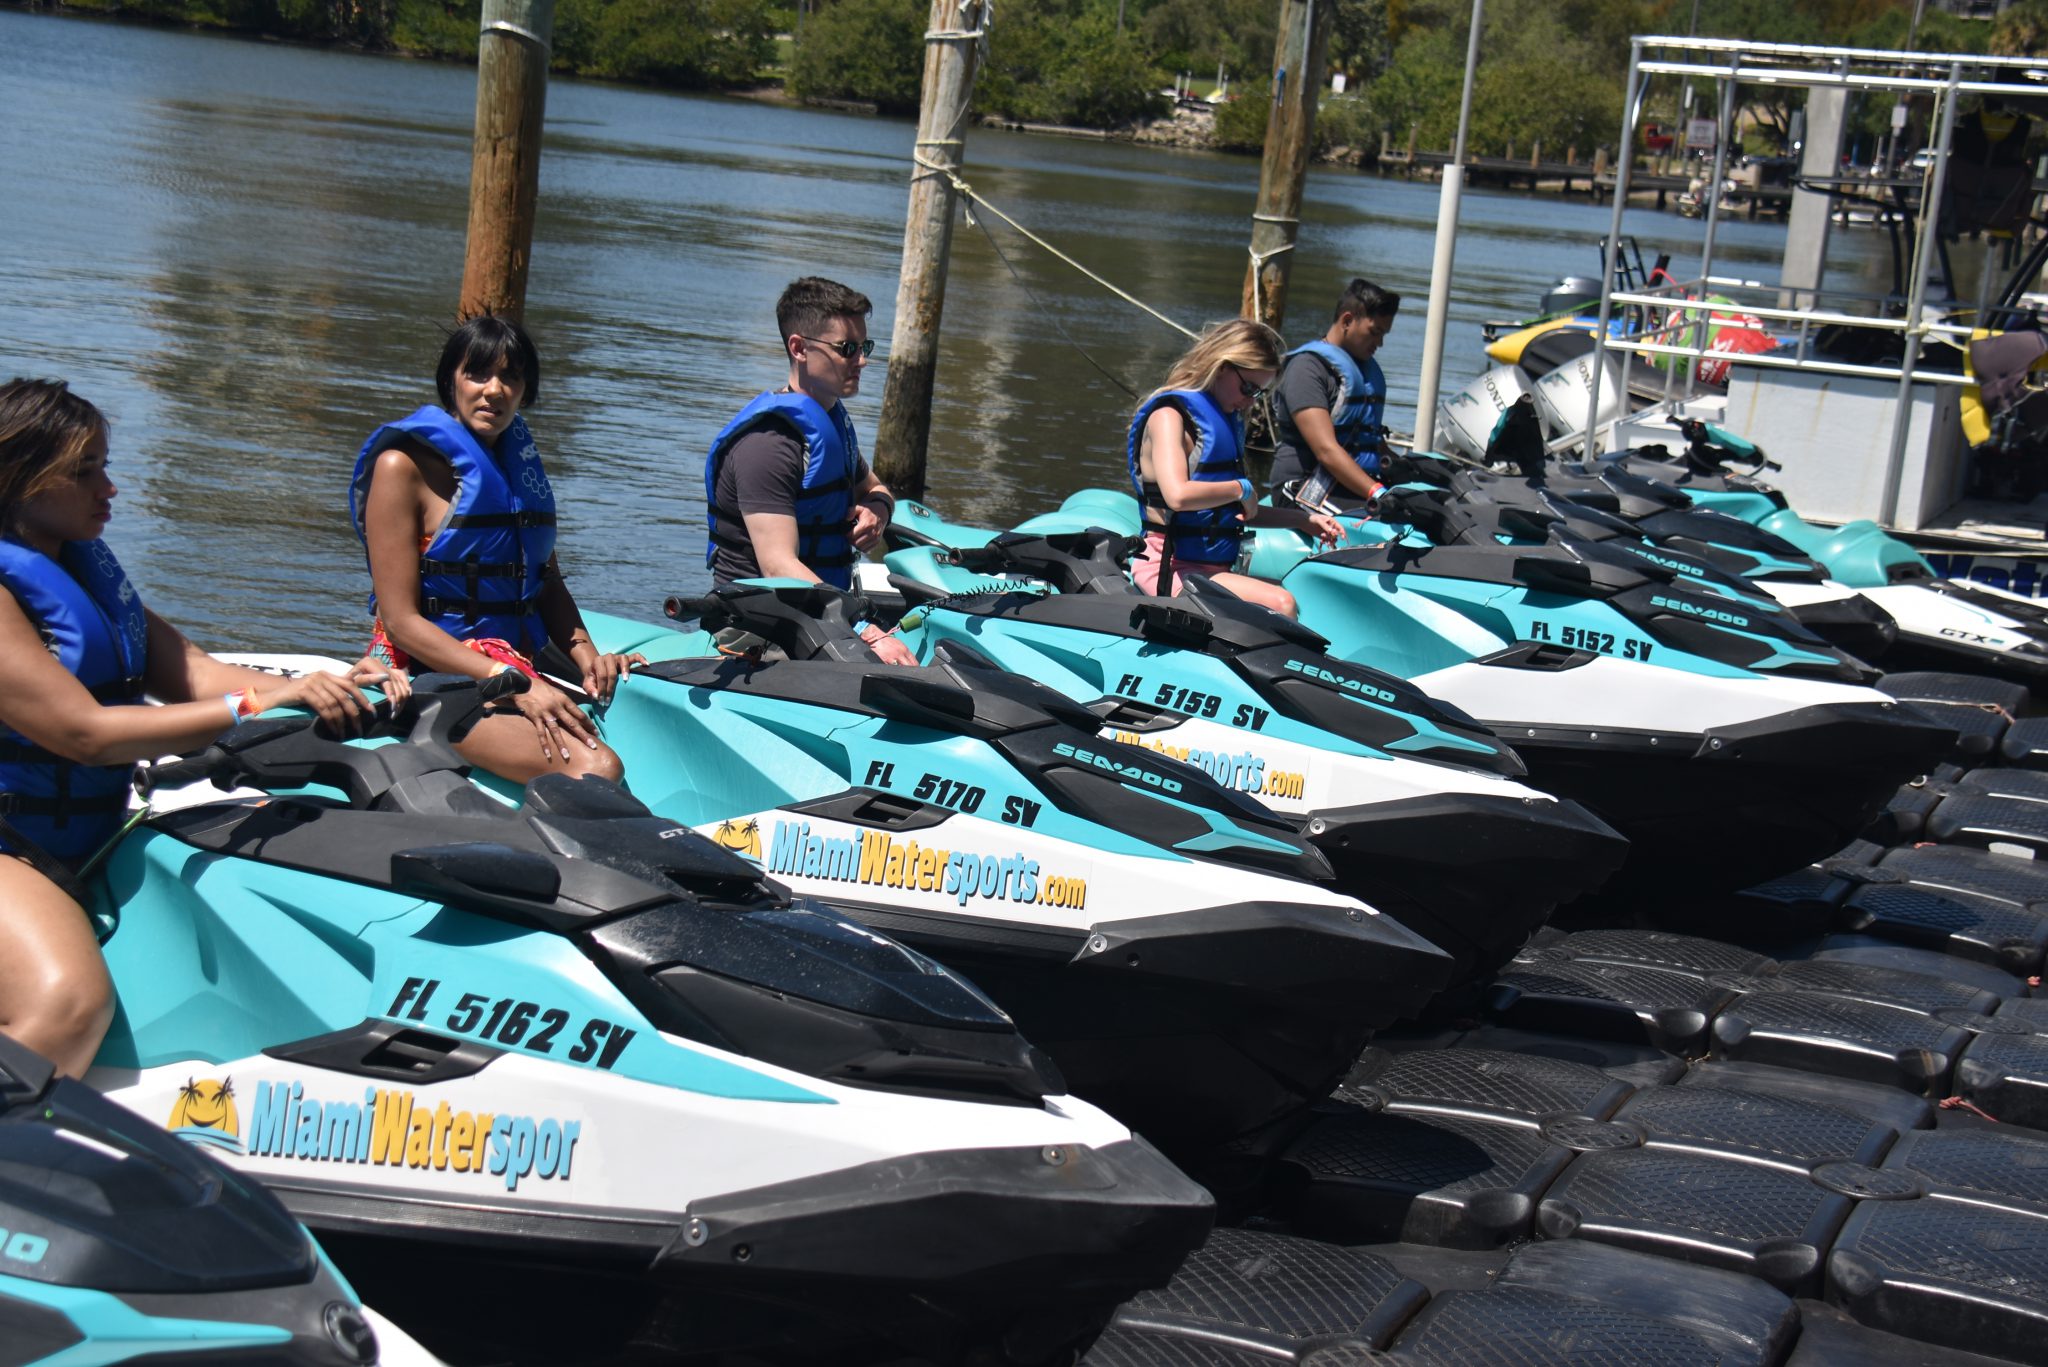 A Guide to Sustainable Watersports A Eco-Friendly Jet Skiing in Miami